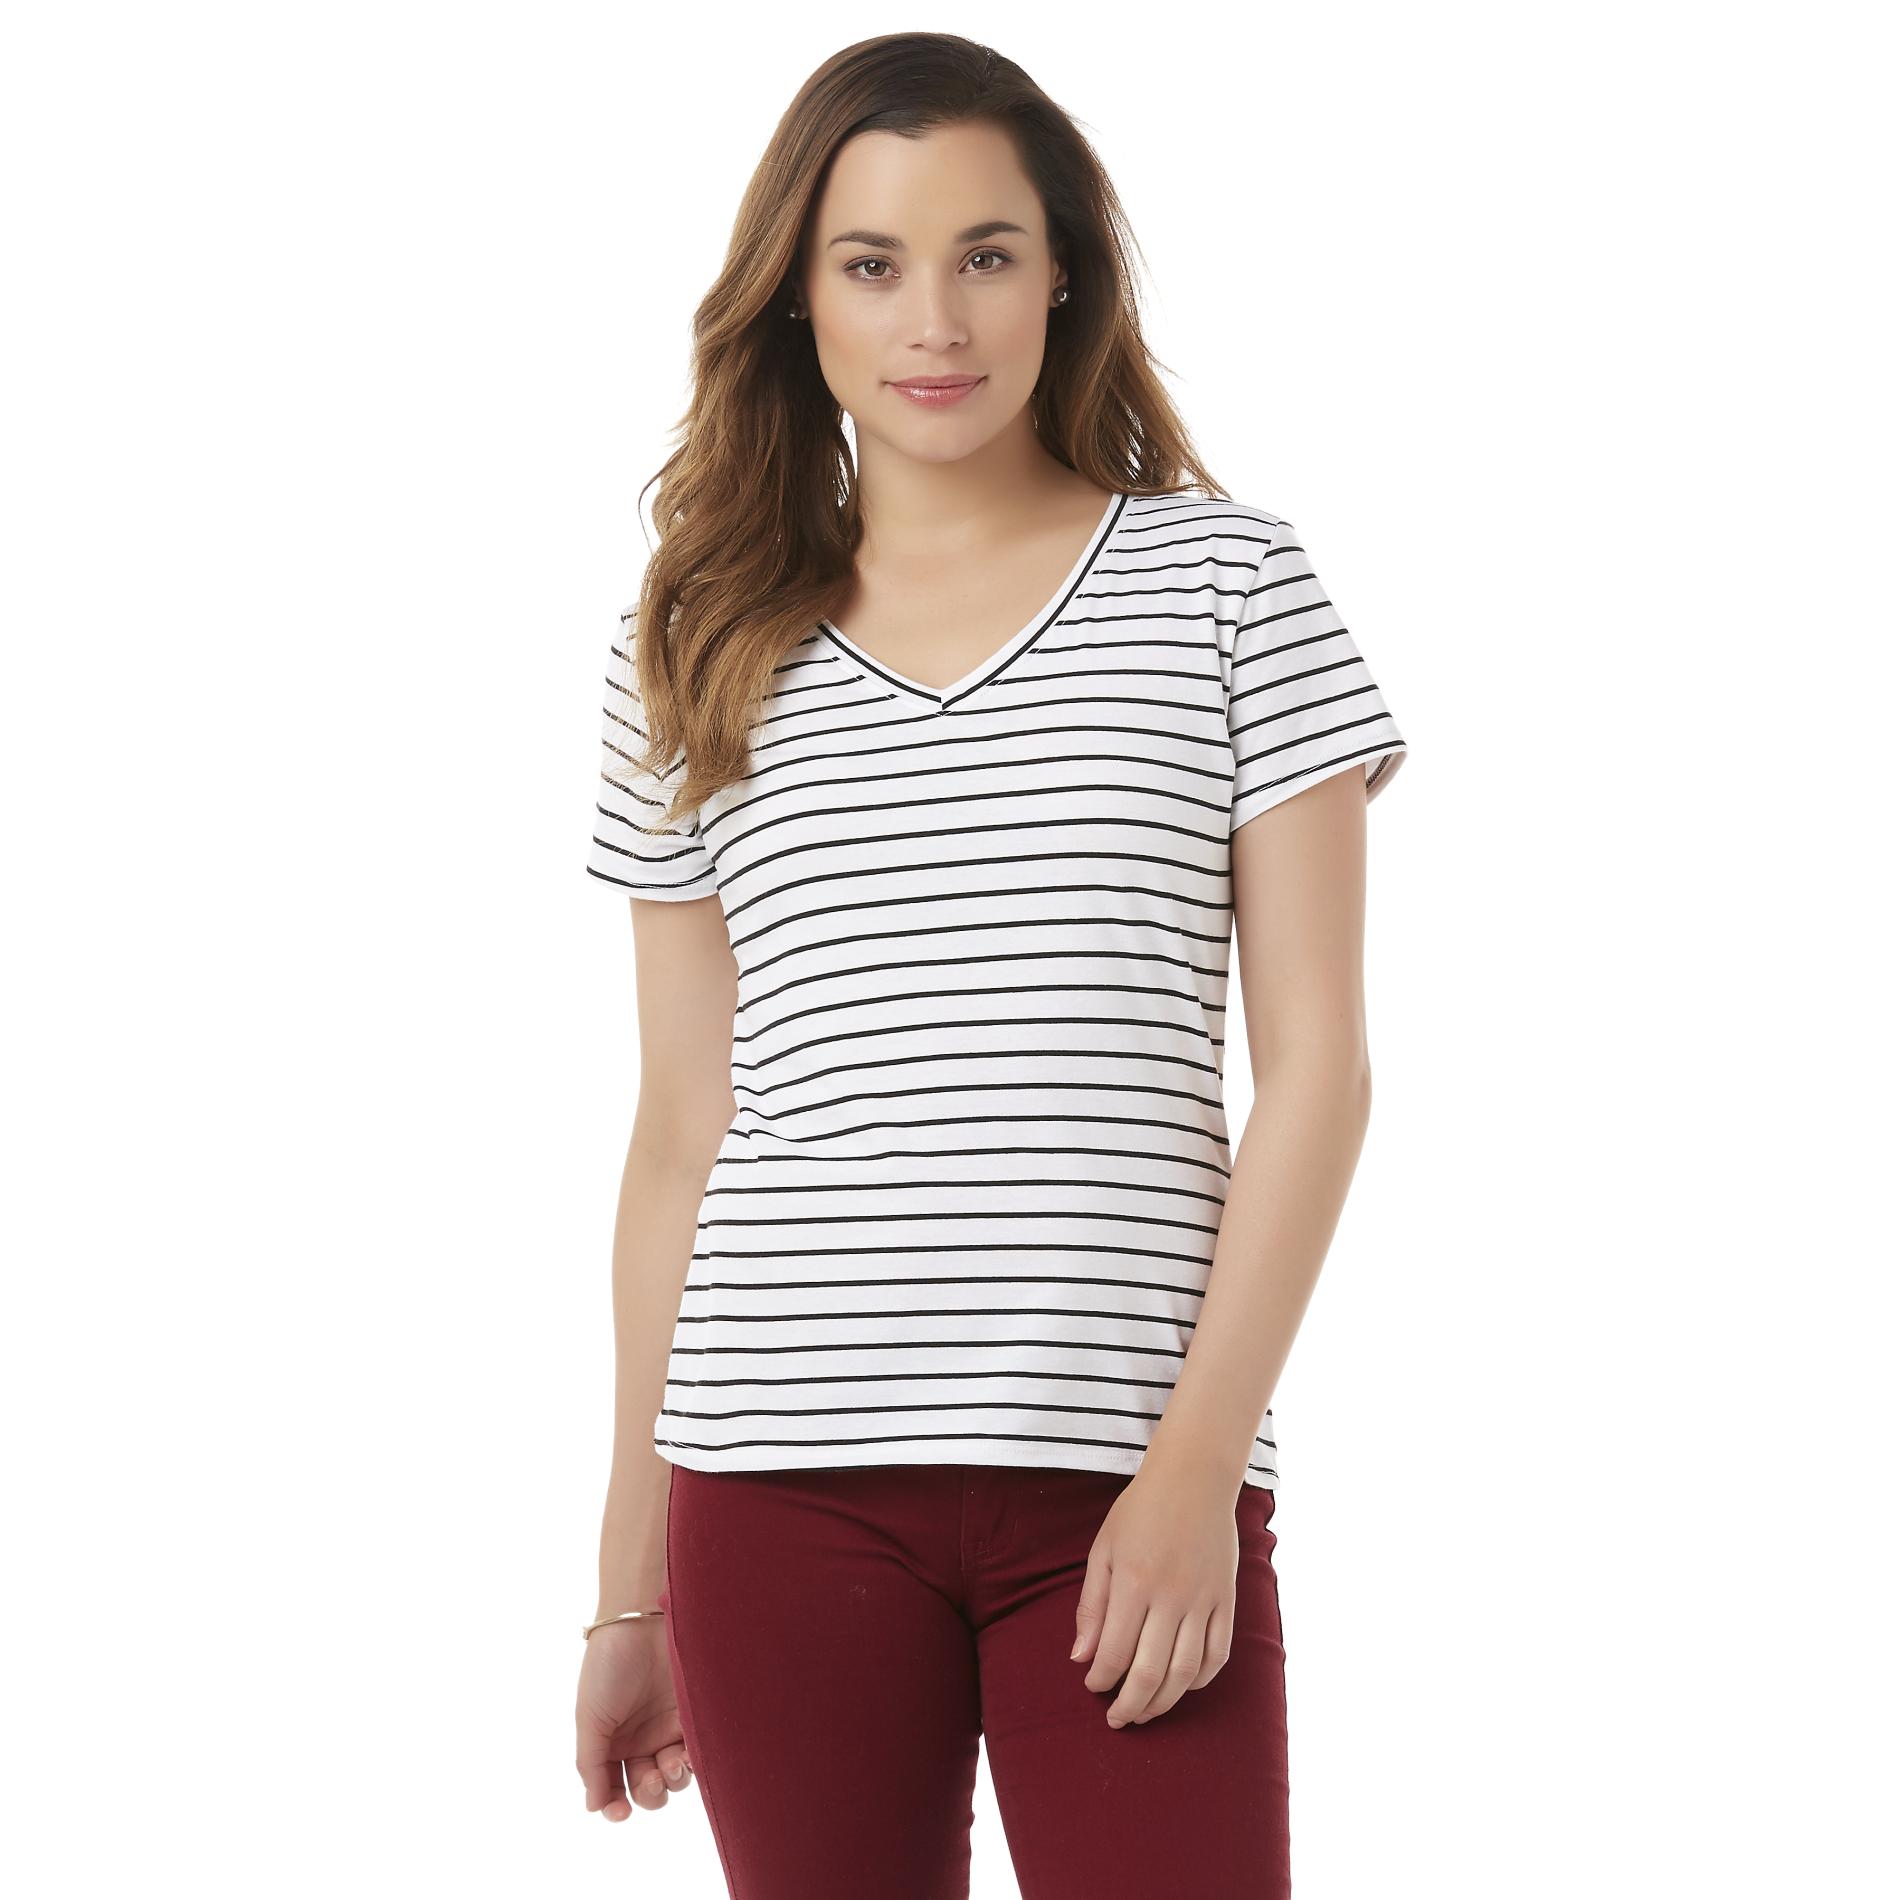 Simply Styled Women's V-Neck T-Shirt - Striped